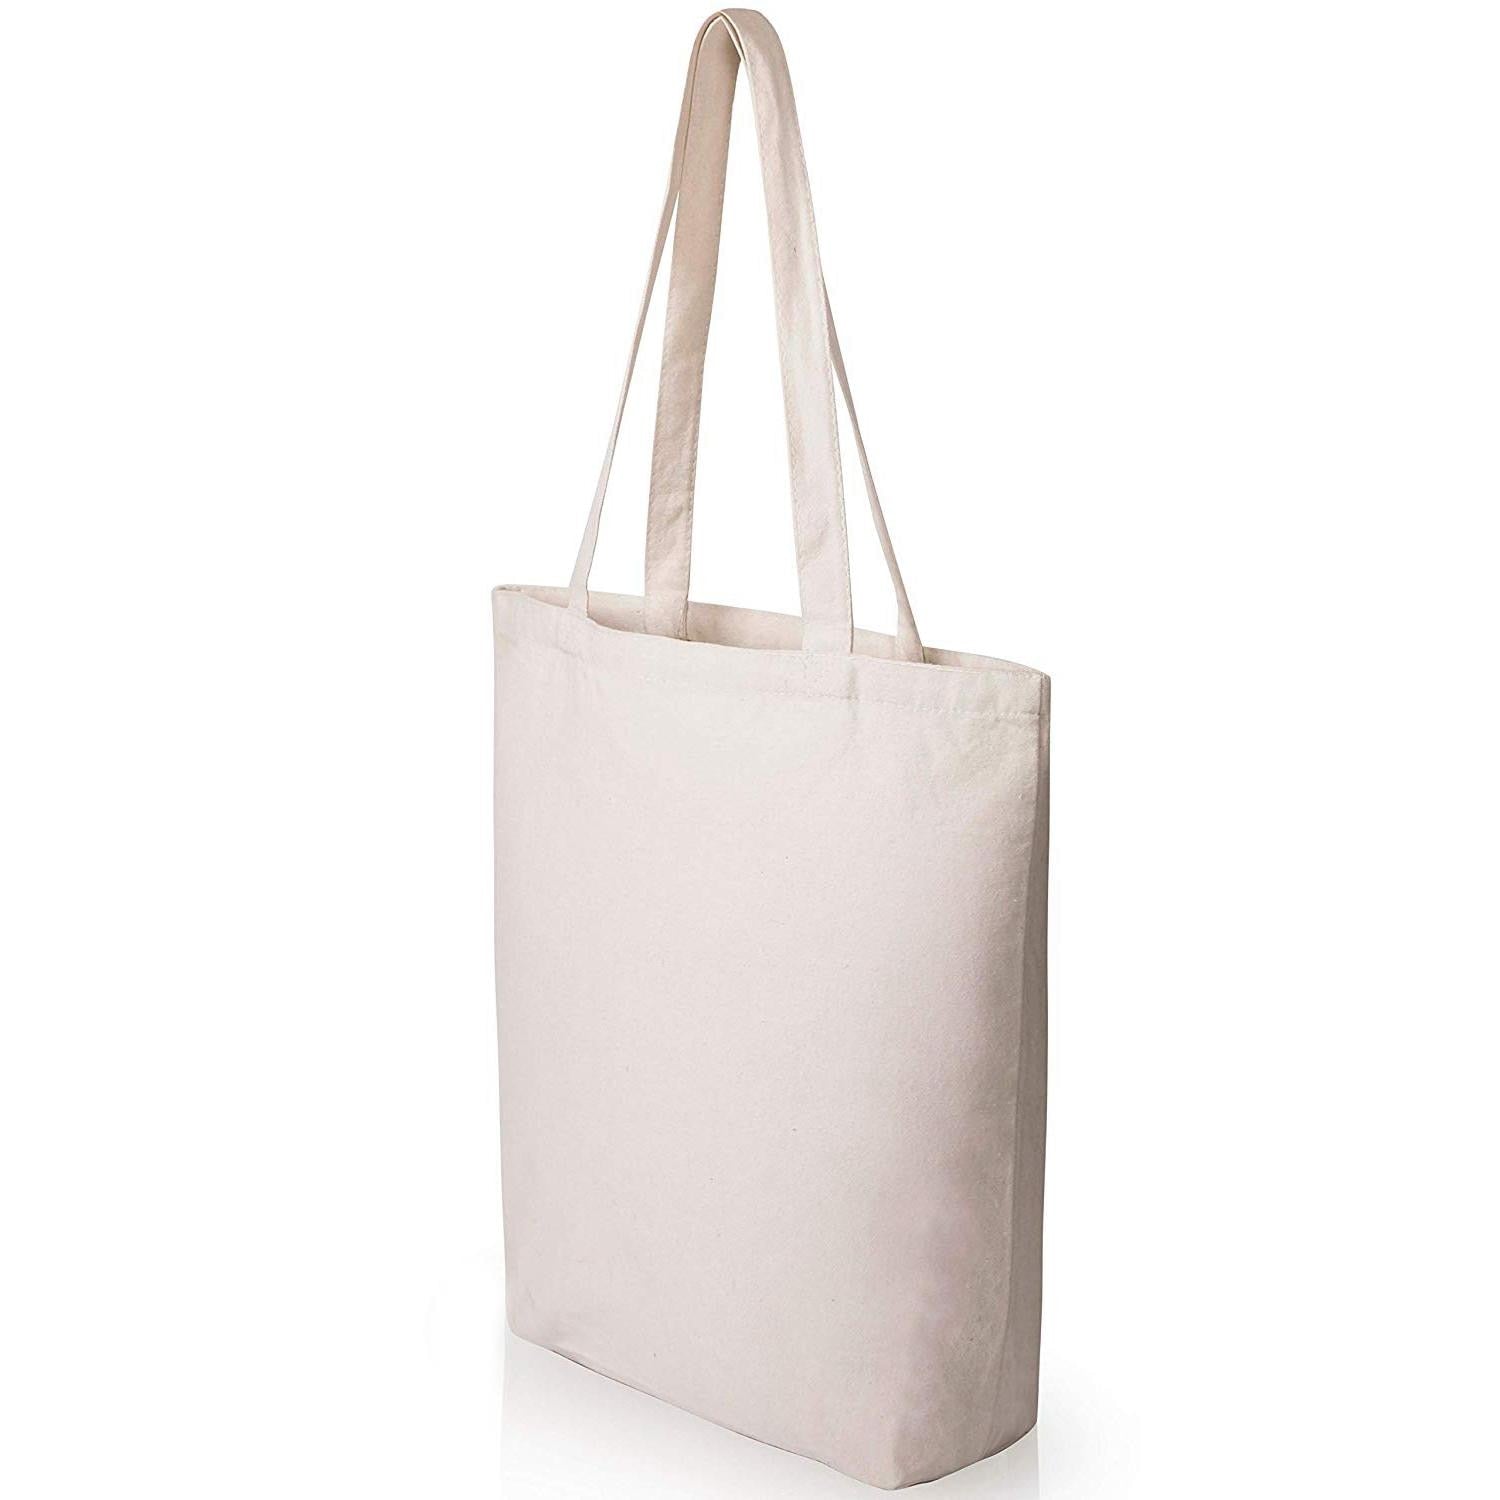 Heavy Duty and Strong Large Natural Canvas Tote Bags with Bottom Gusset for Crafts,Shopping,Groceries,Books,Welcome Bag,D - ebowsos